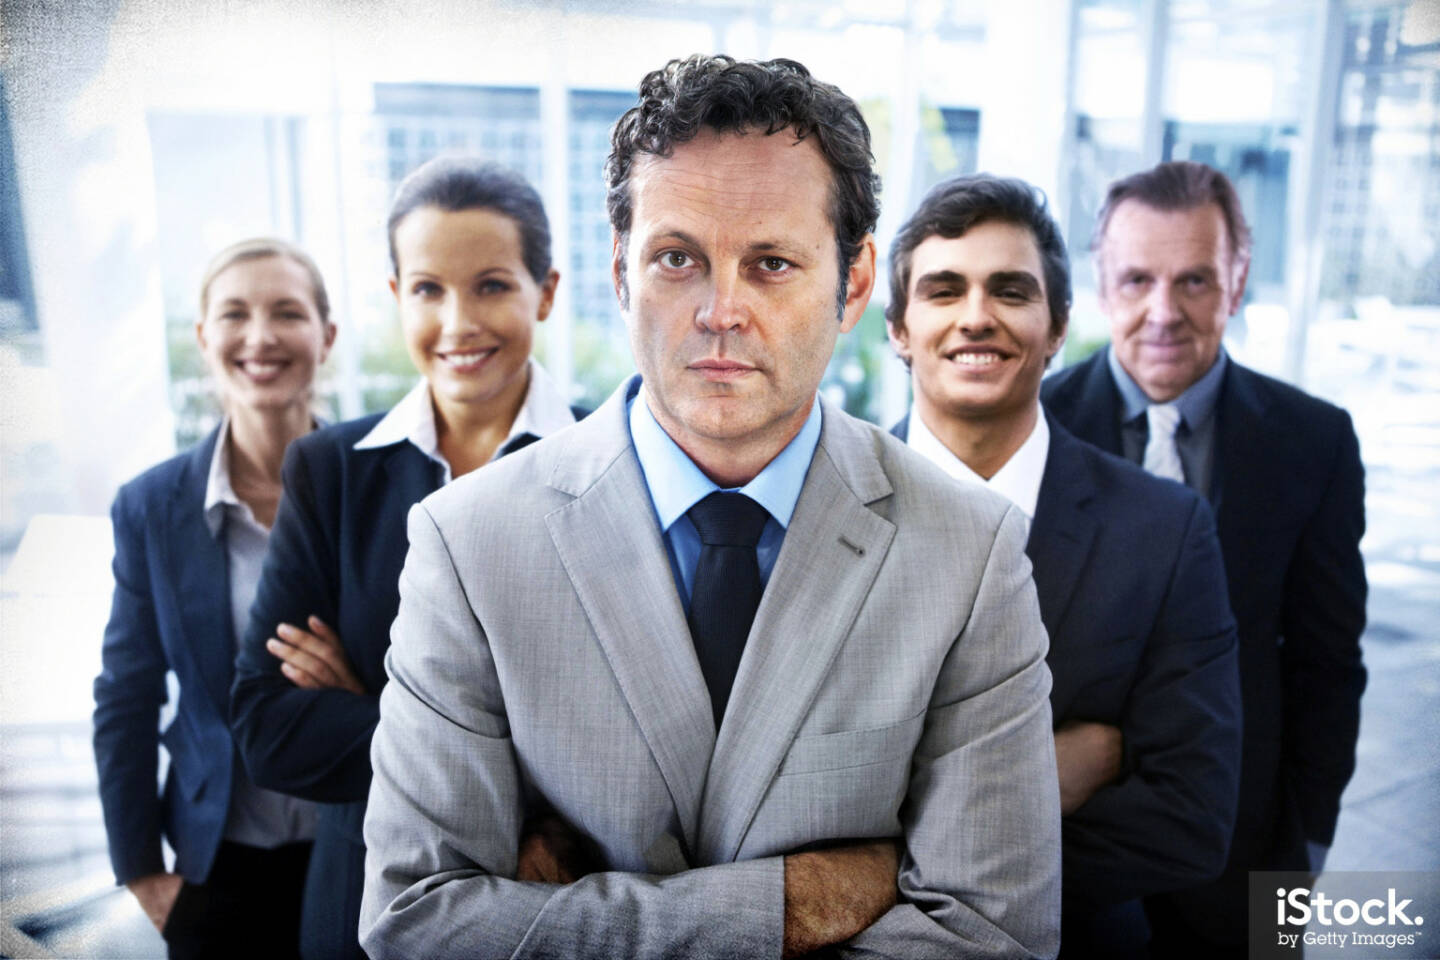 Vince Vaughn - Portrait of a handsome business leader crossing his arms with his team standing behind him - iStock, Getty Images